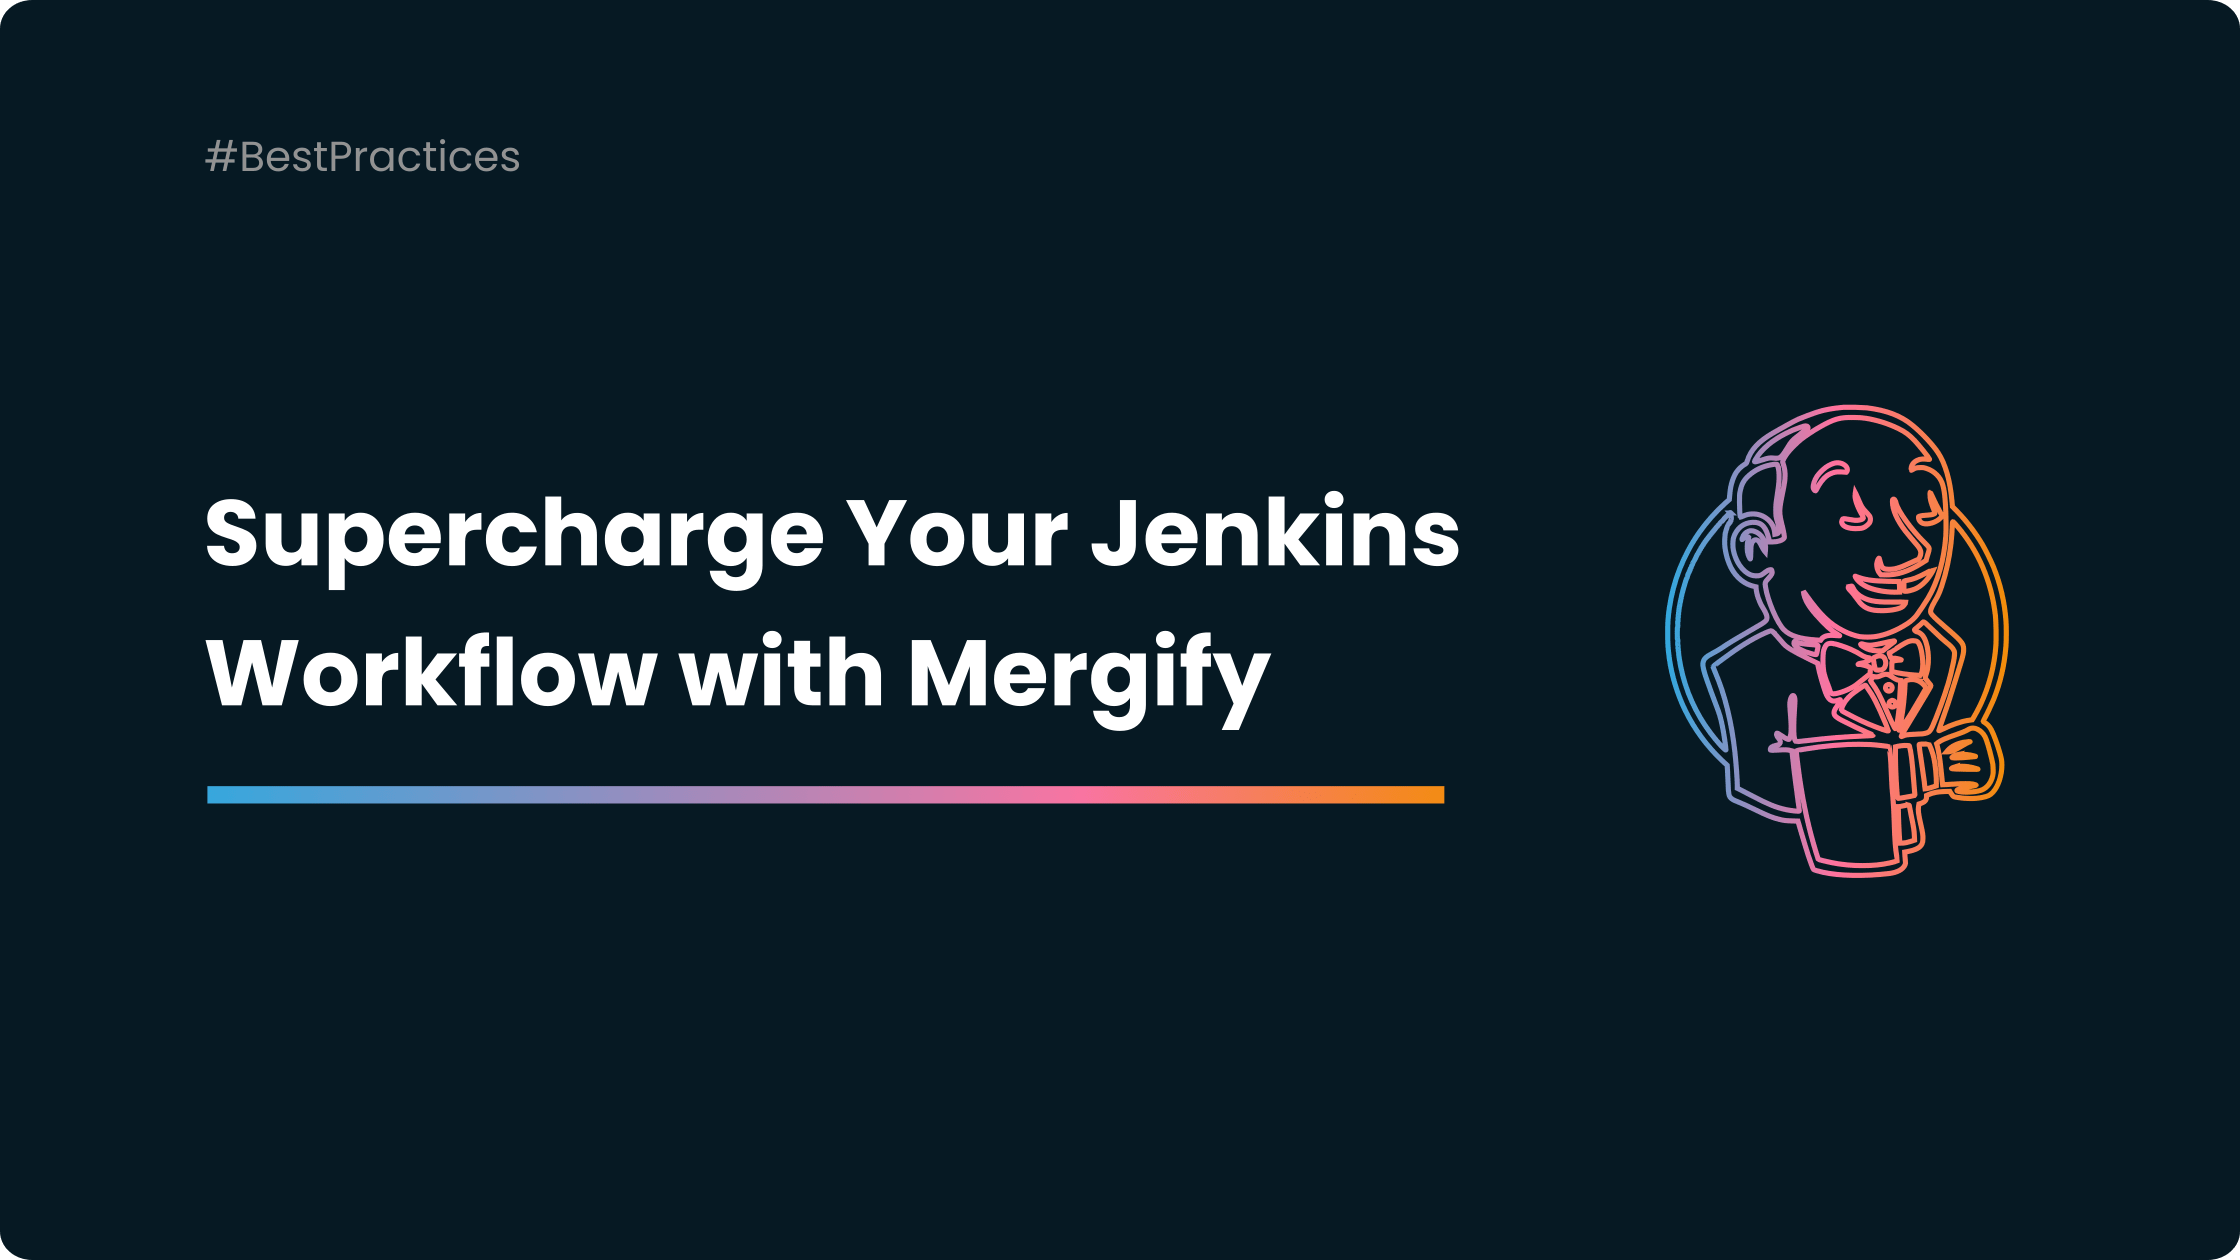 Supercharge Your Jenkins Workflow with Mergify